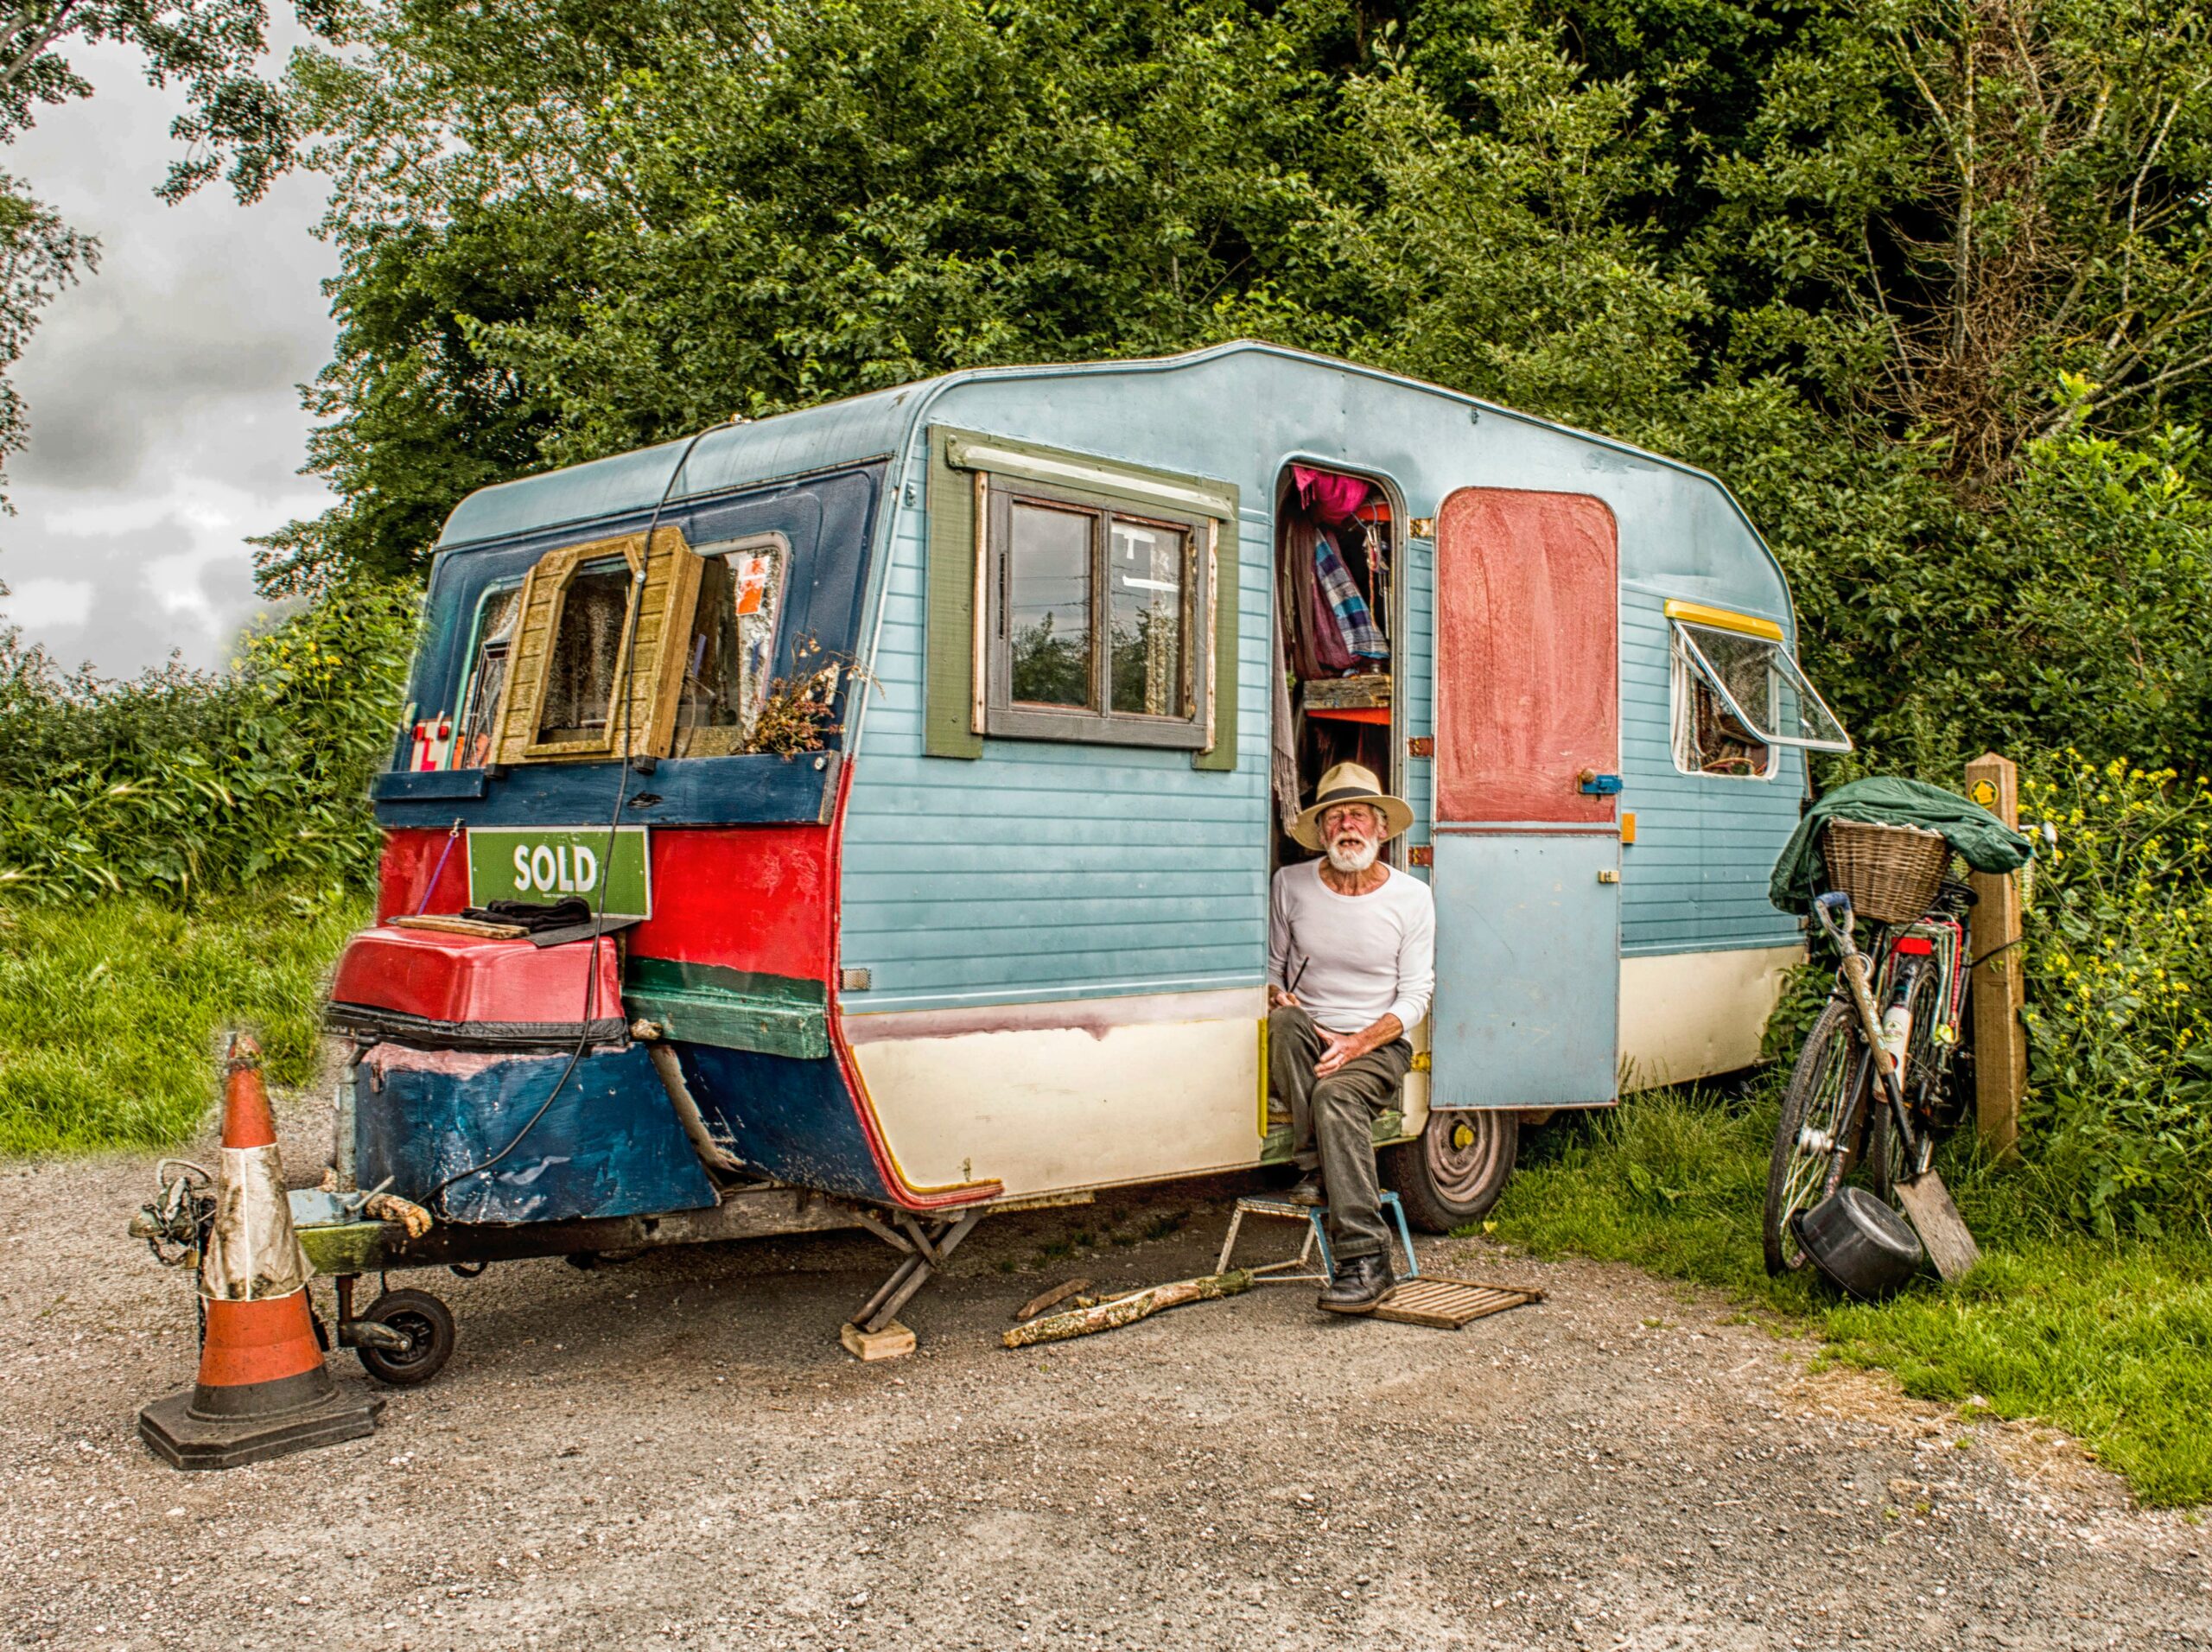 What's The Average Age of an RV Owner?